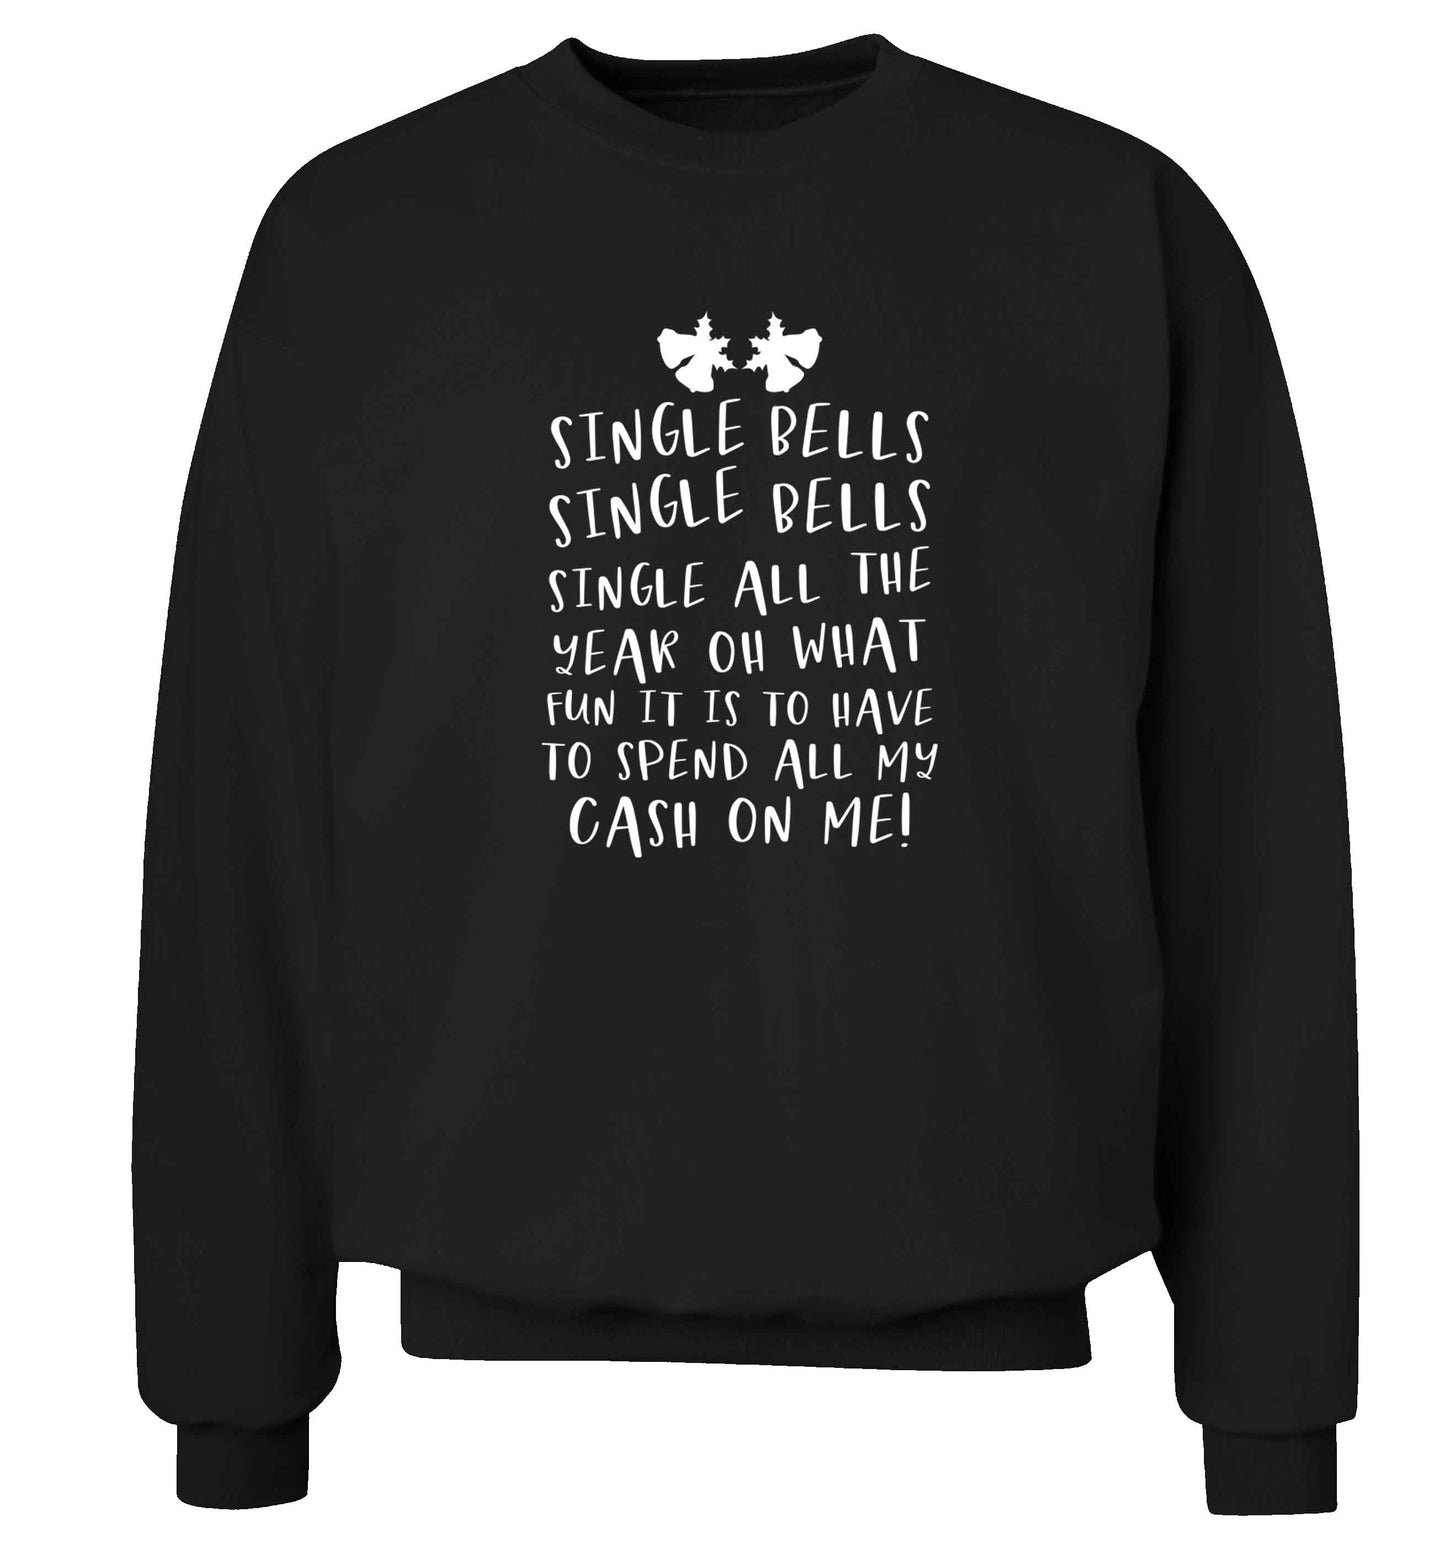 Single bells oh what fun it is to have to spend all my cash on me! Adult's unisex black Sweater 2XL